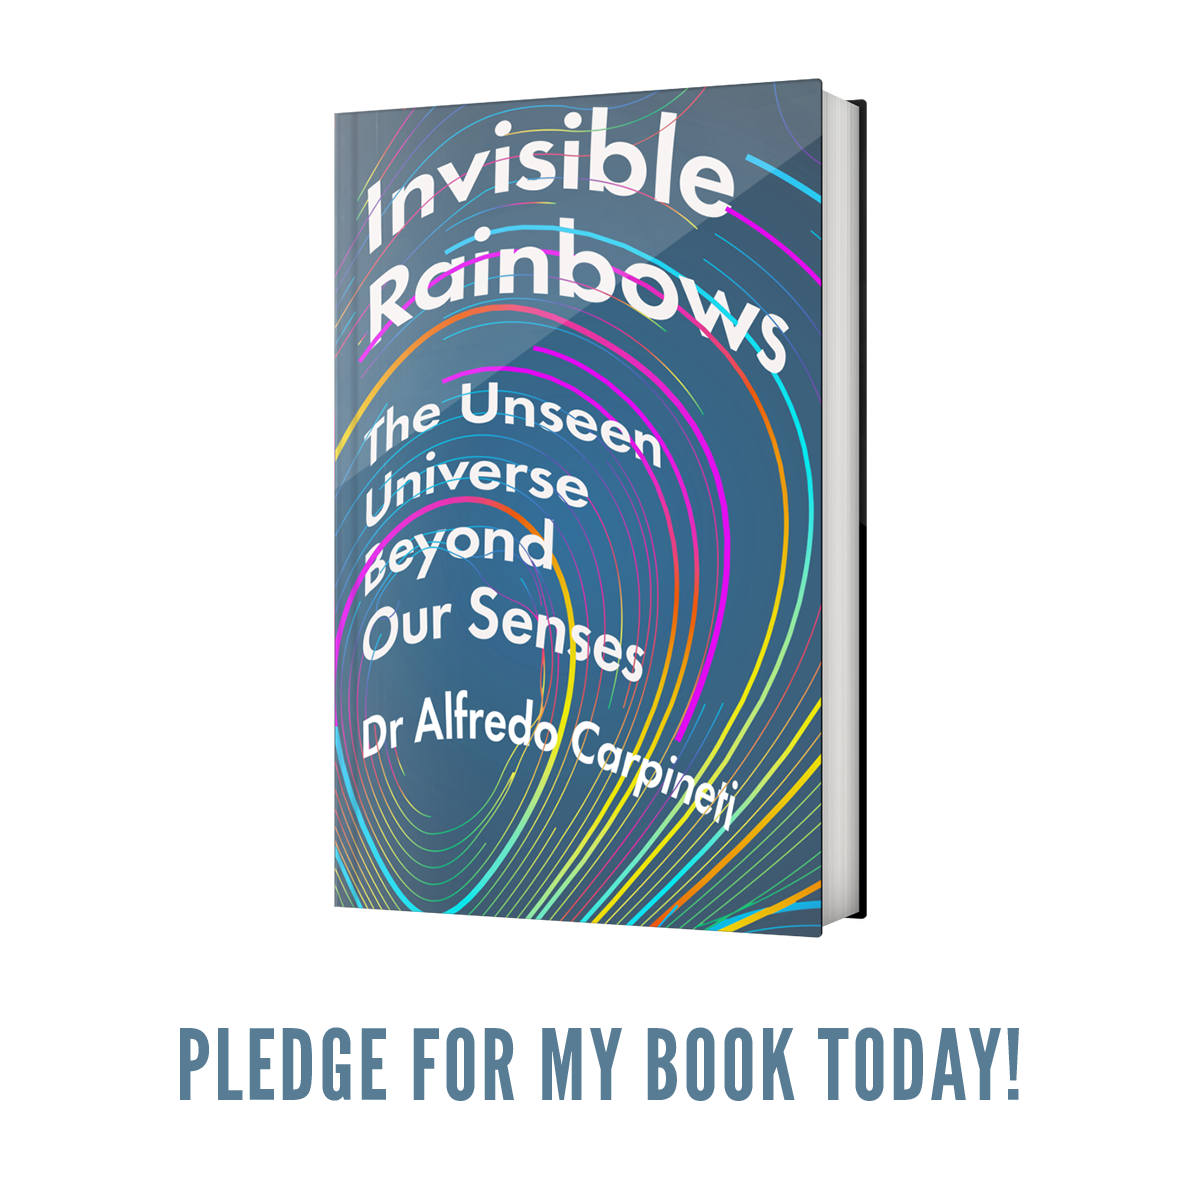 A 3d render of my book invisible rainbows with a request to pledge for it